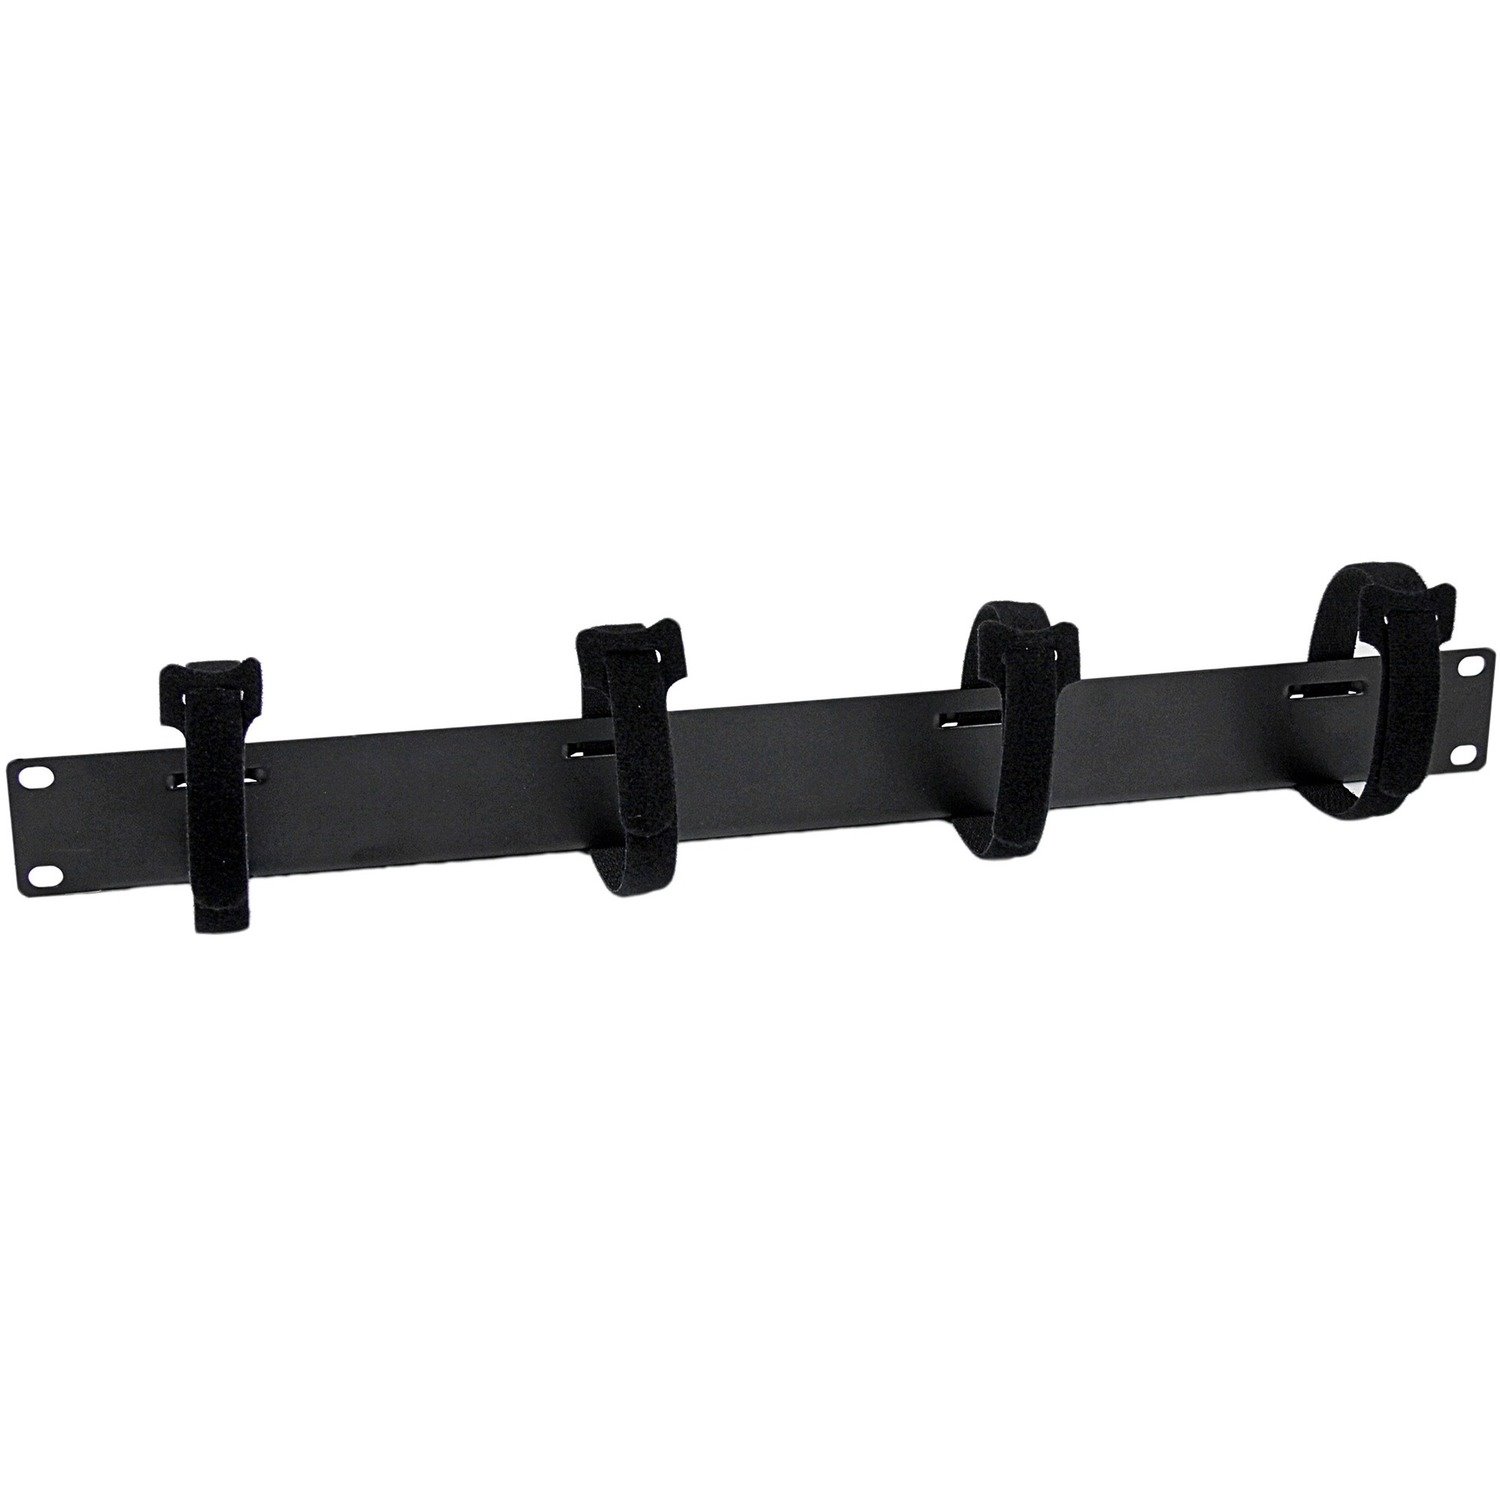 StarTech.com Cable Management Panel with Hook and Loop Strips for Server Racks - 1U